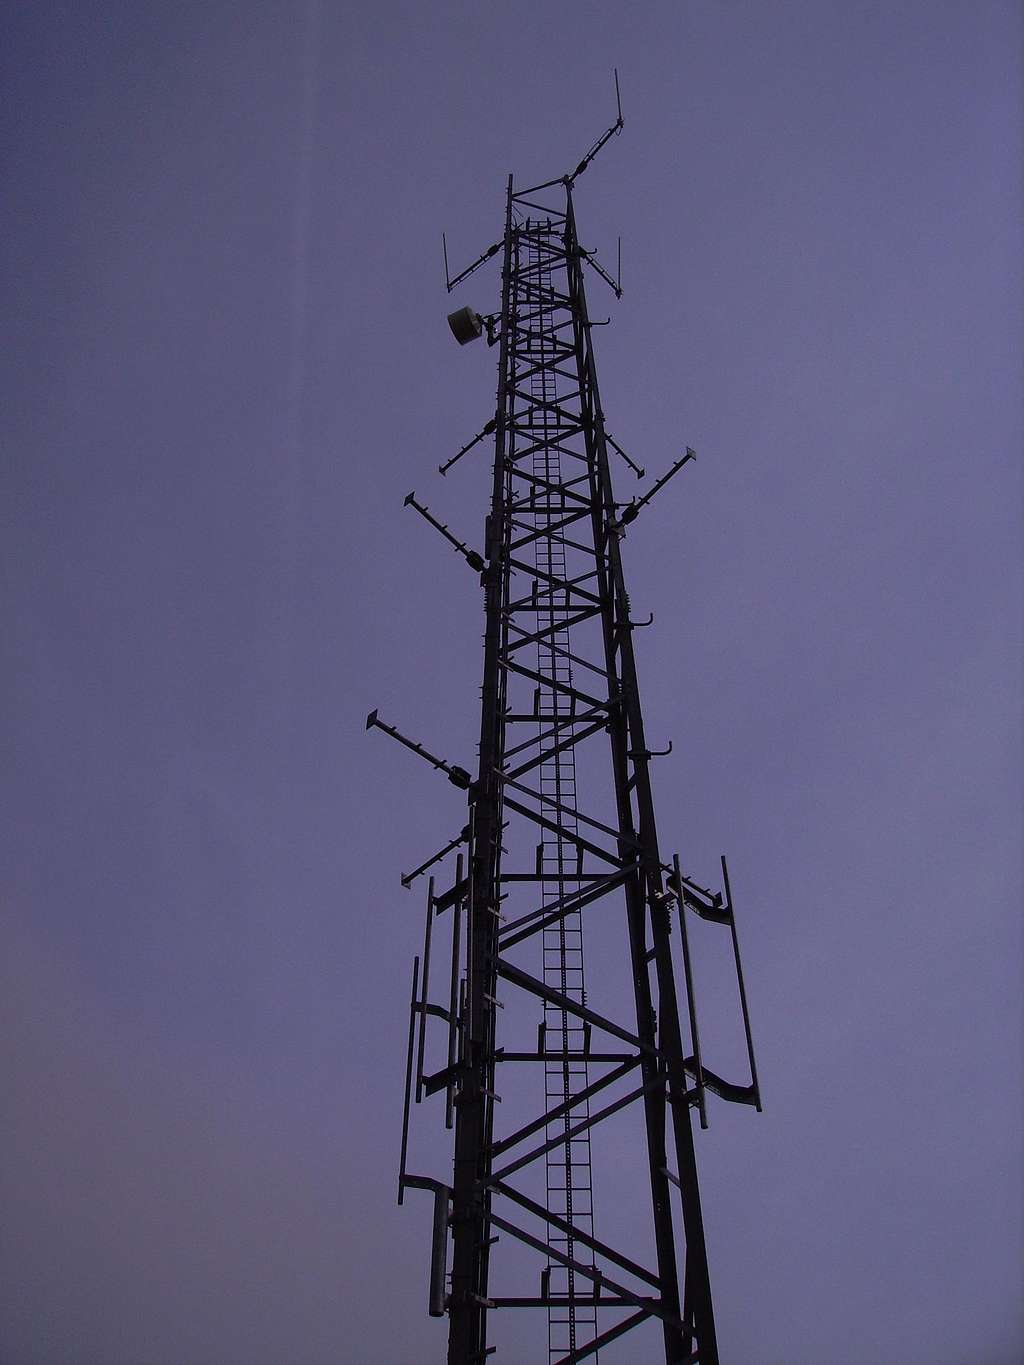 Broad Law new police radio tower